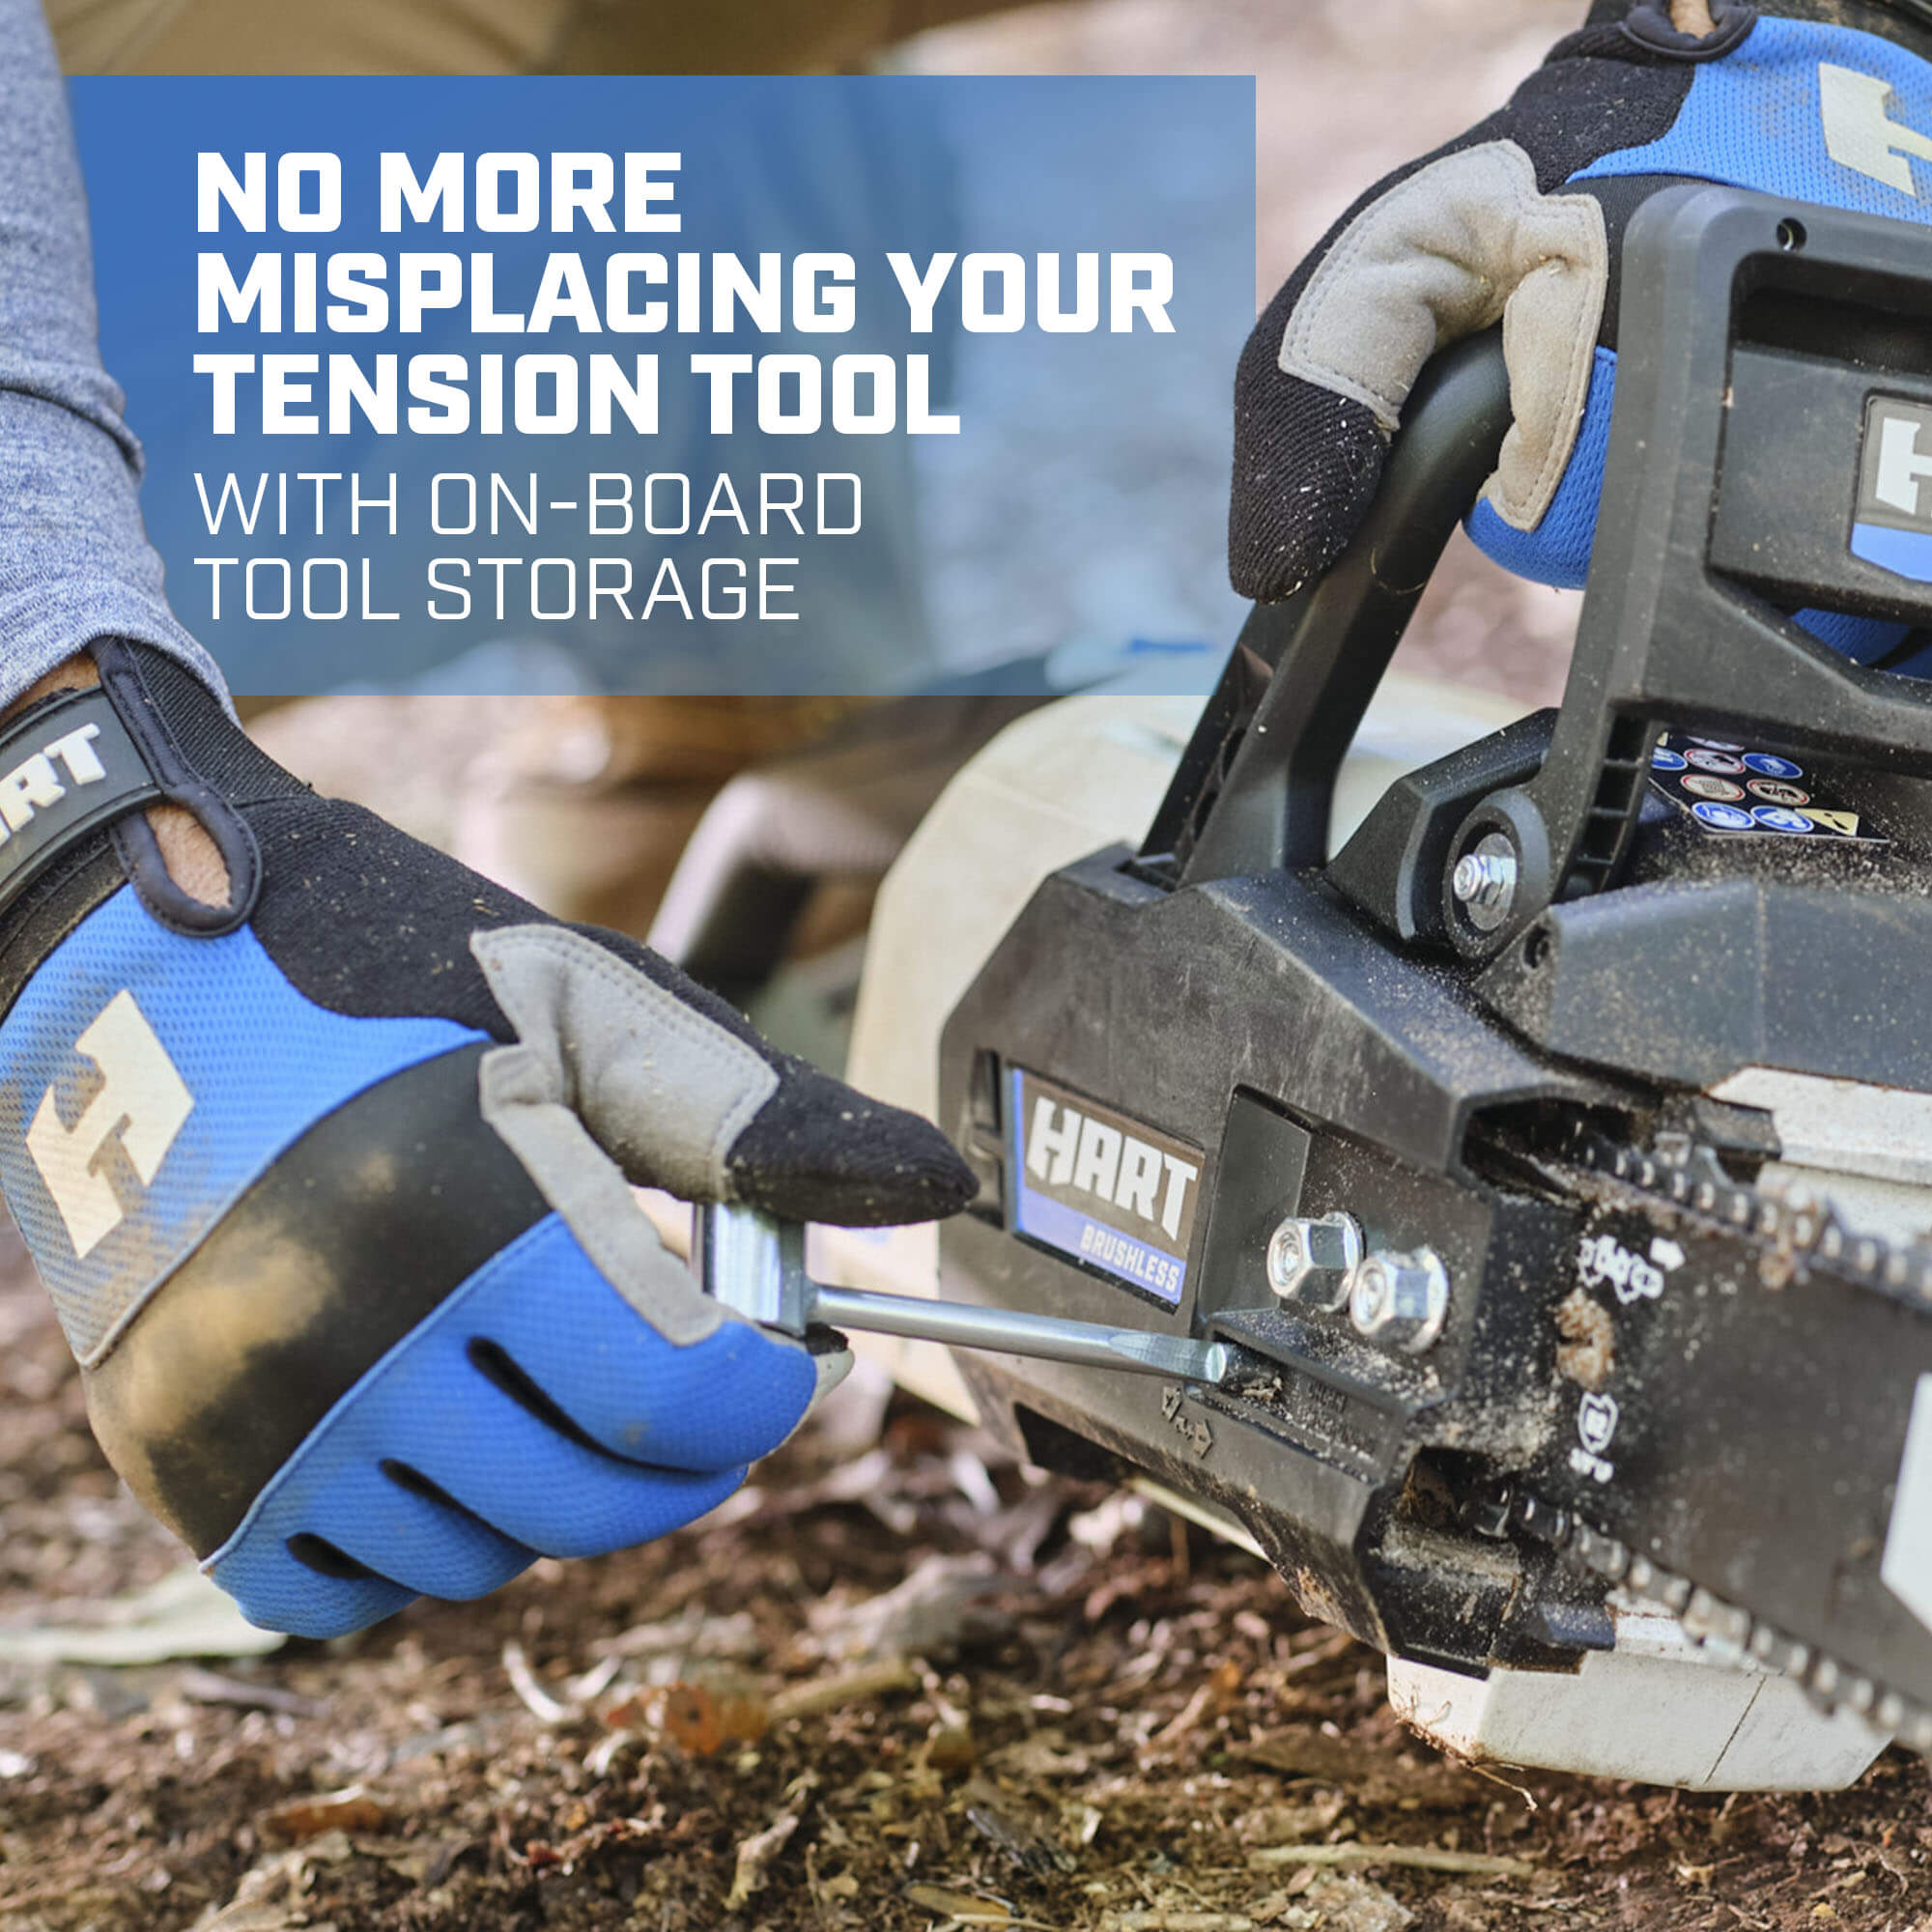 no more misplacing your tension tool with onboard tool storage